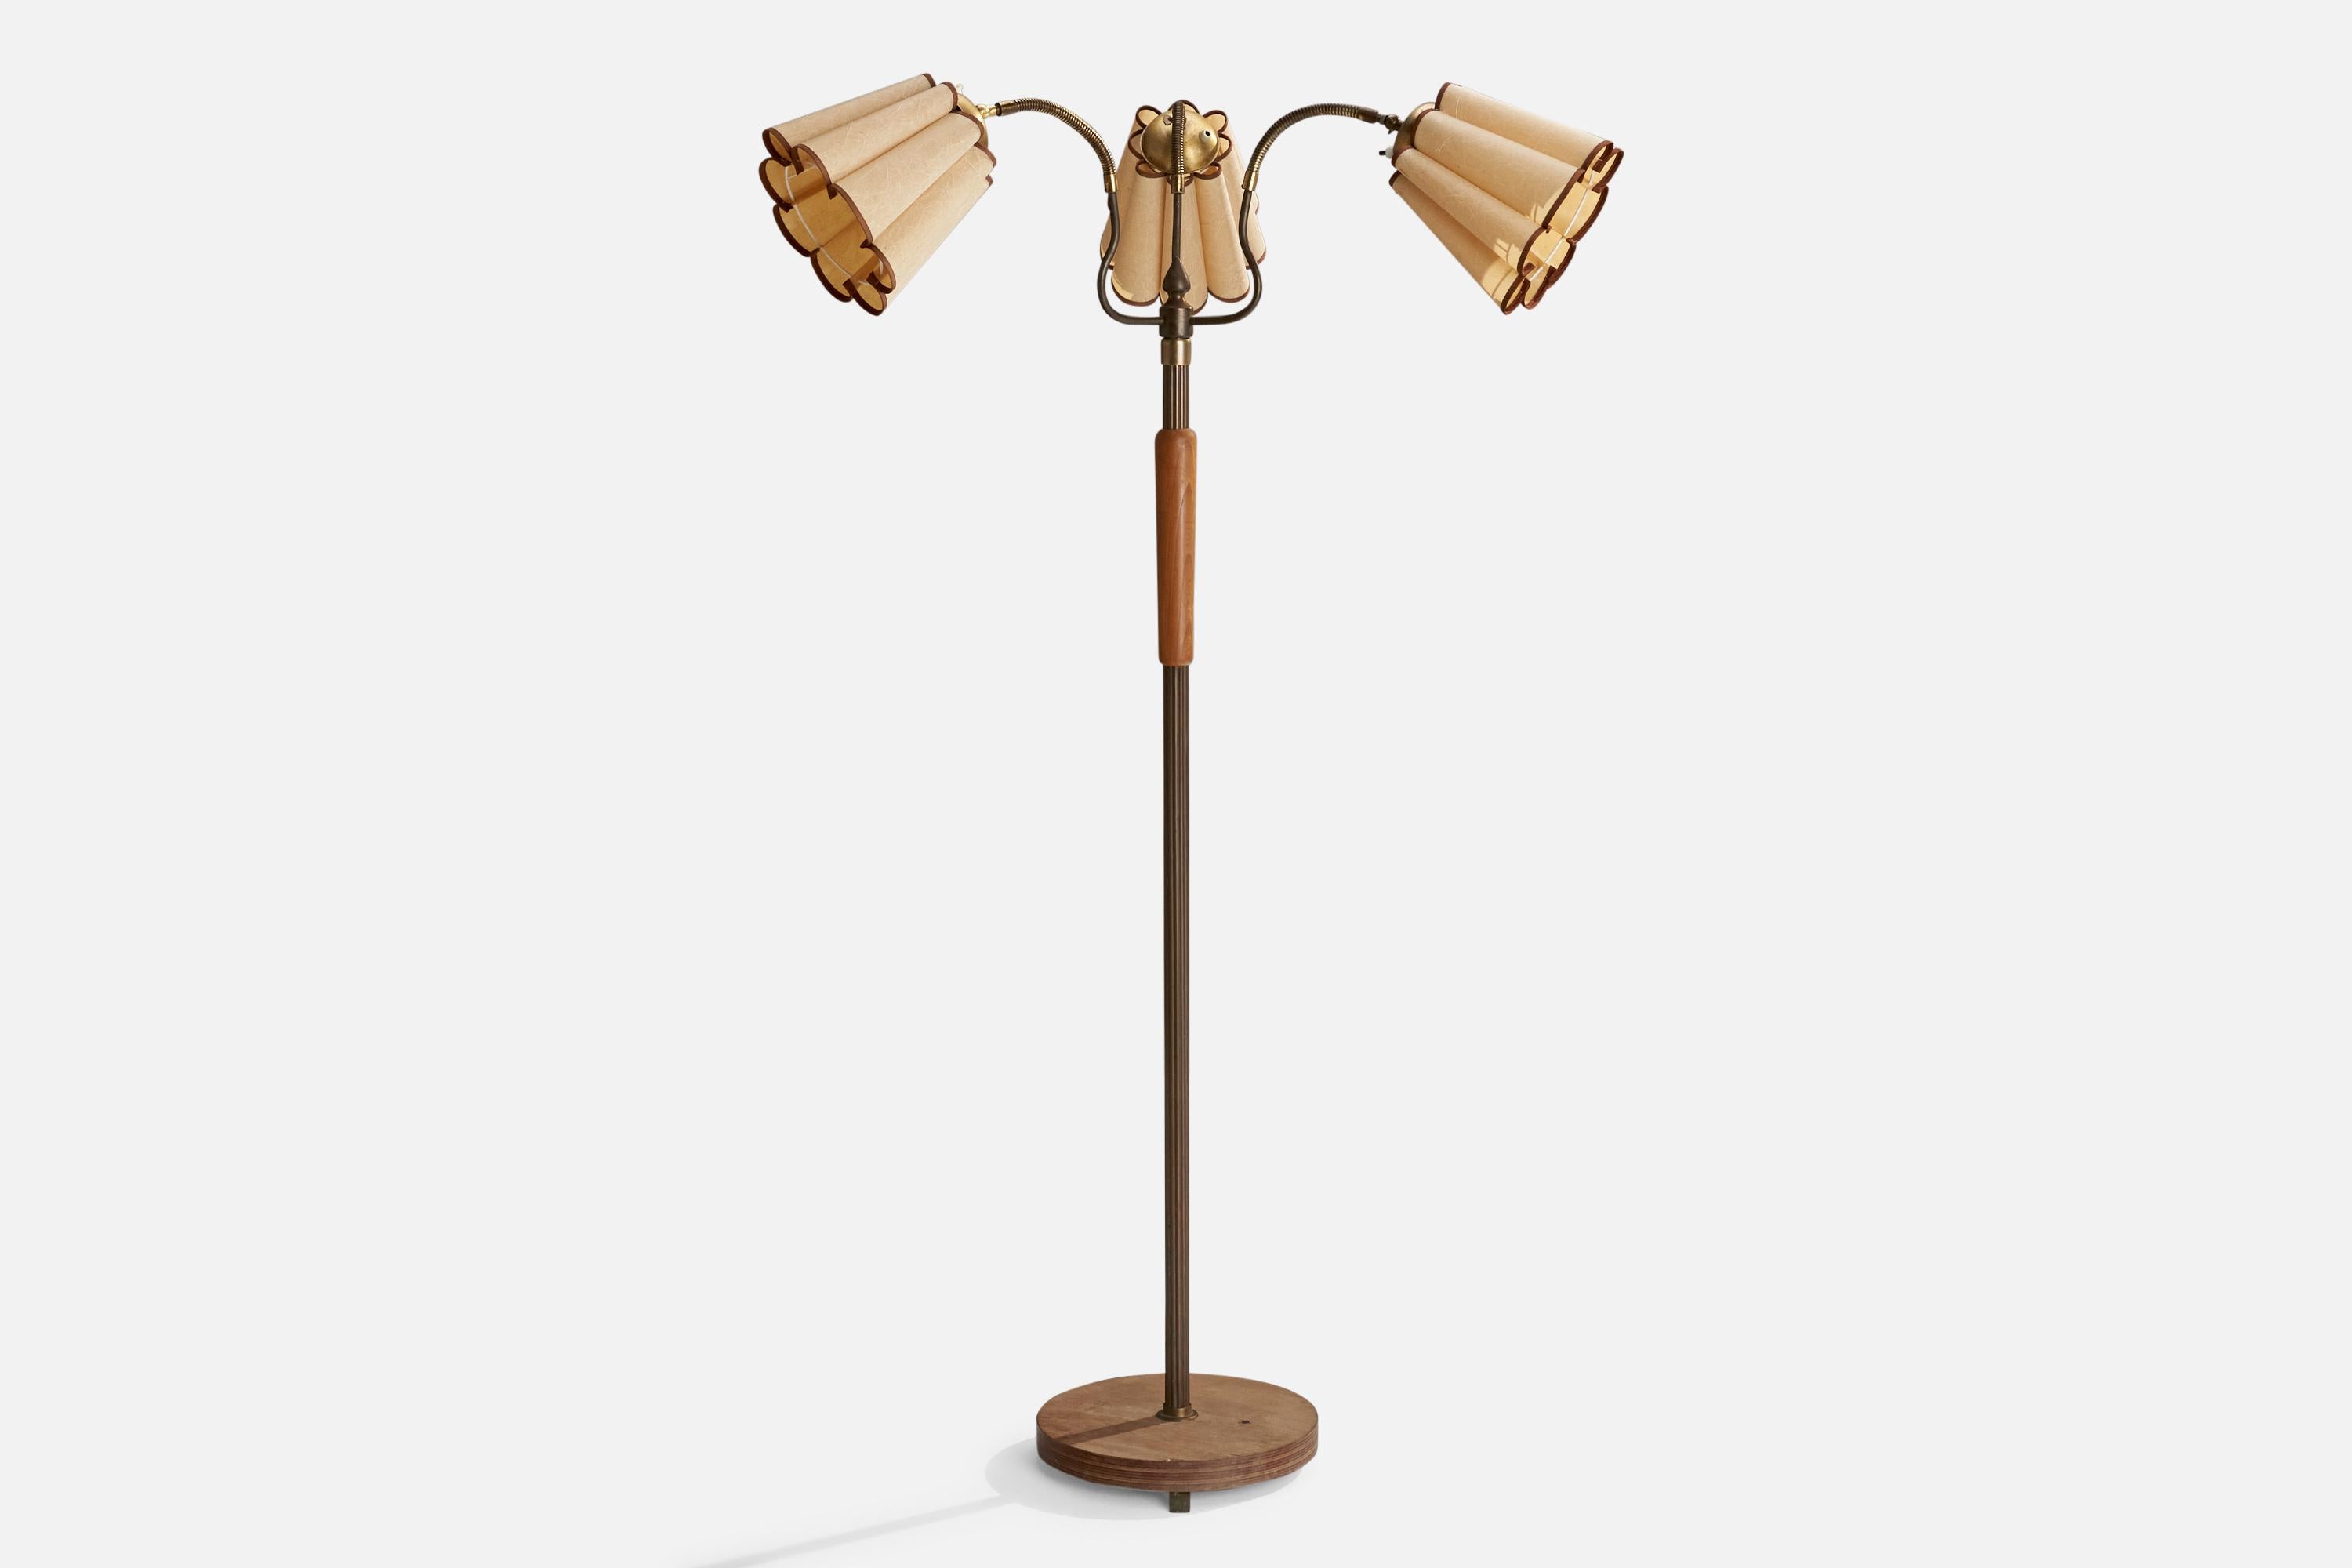 An adjustable three-armed brass, elm and paper floor lamp designed and produced in Sweden, 1940s.

Dimensions variable

Overall Dimensions (inches): 63” H x 24” D
Stated dimensions include shade.
Bulb Specifications: E-26 Bulb
Number of Sockets: